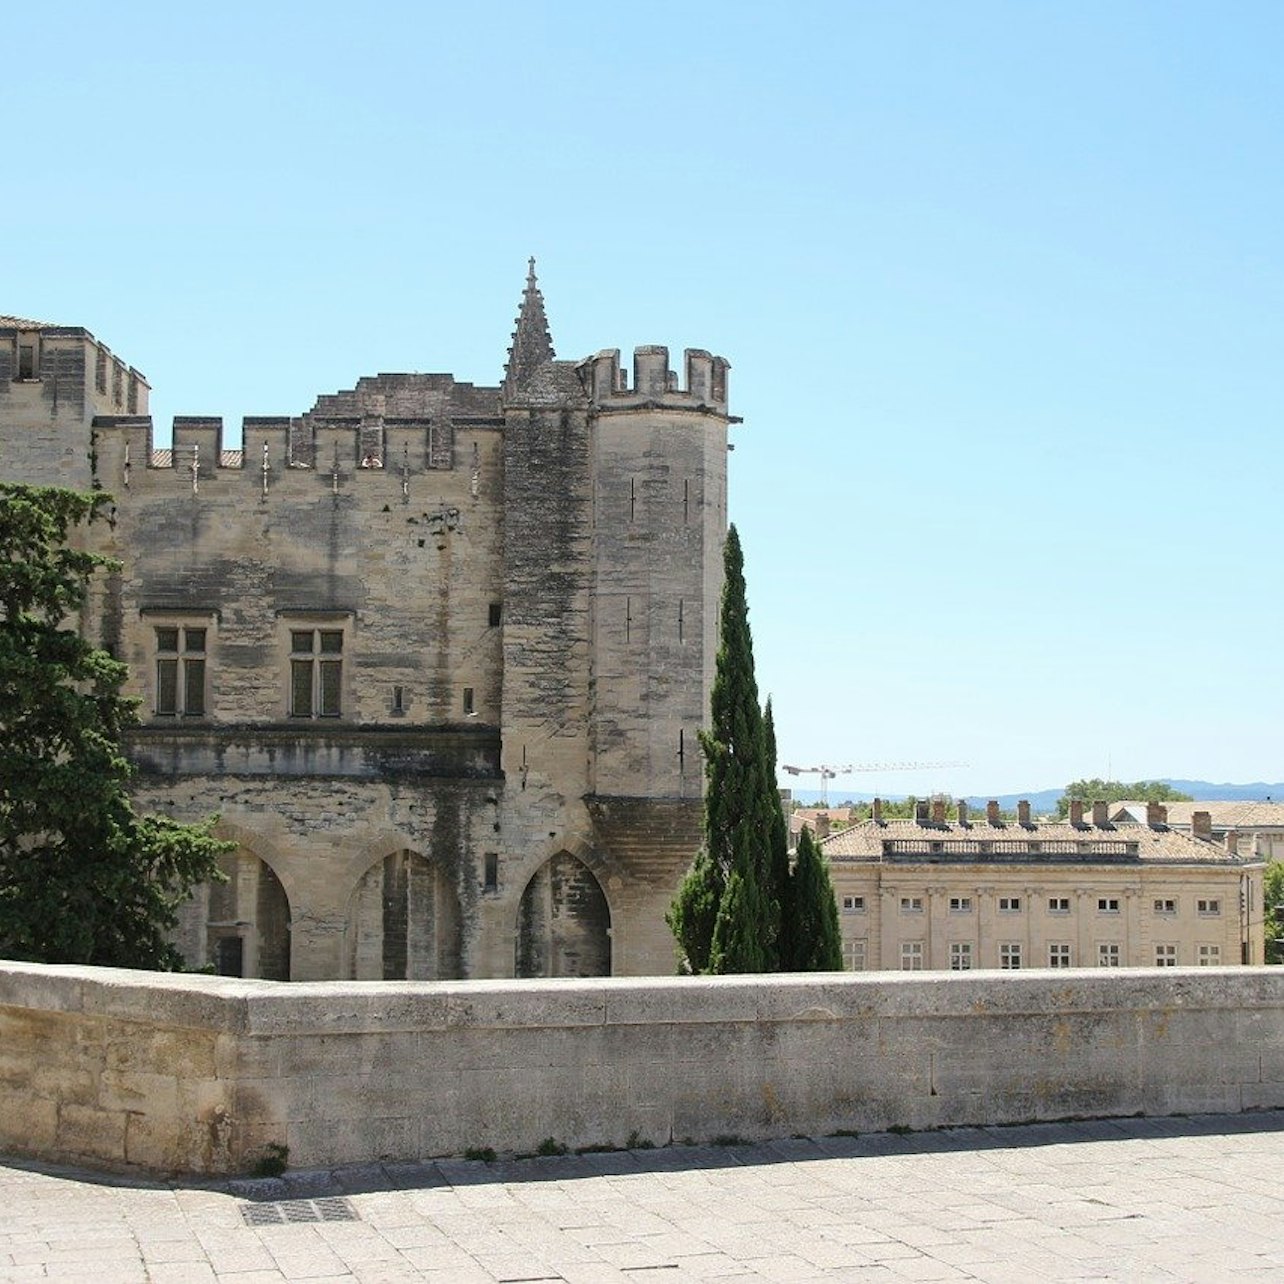 Palais des Papes - Accommodations in Avignon